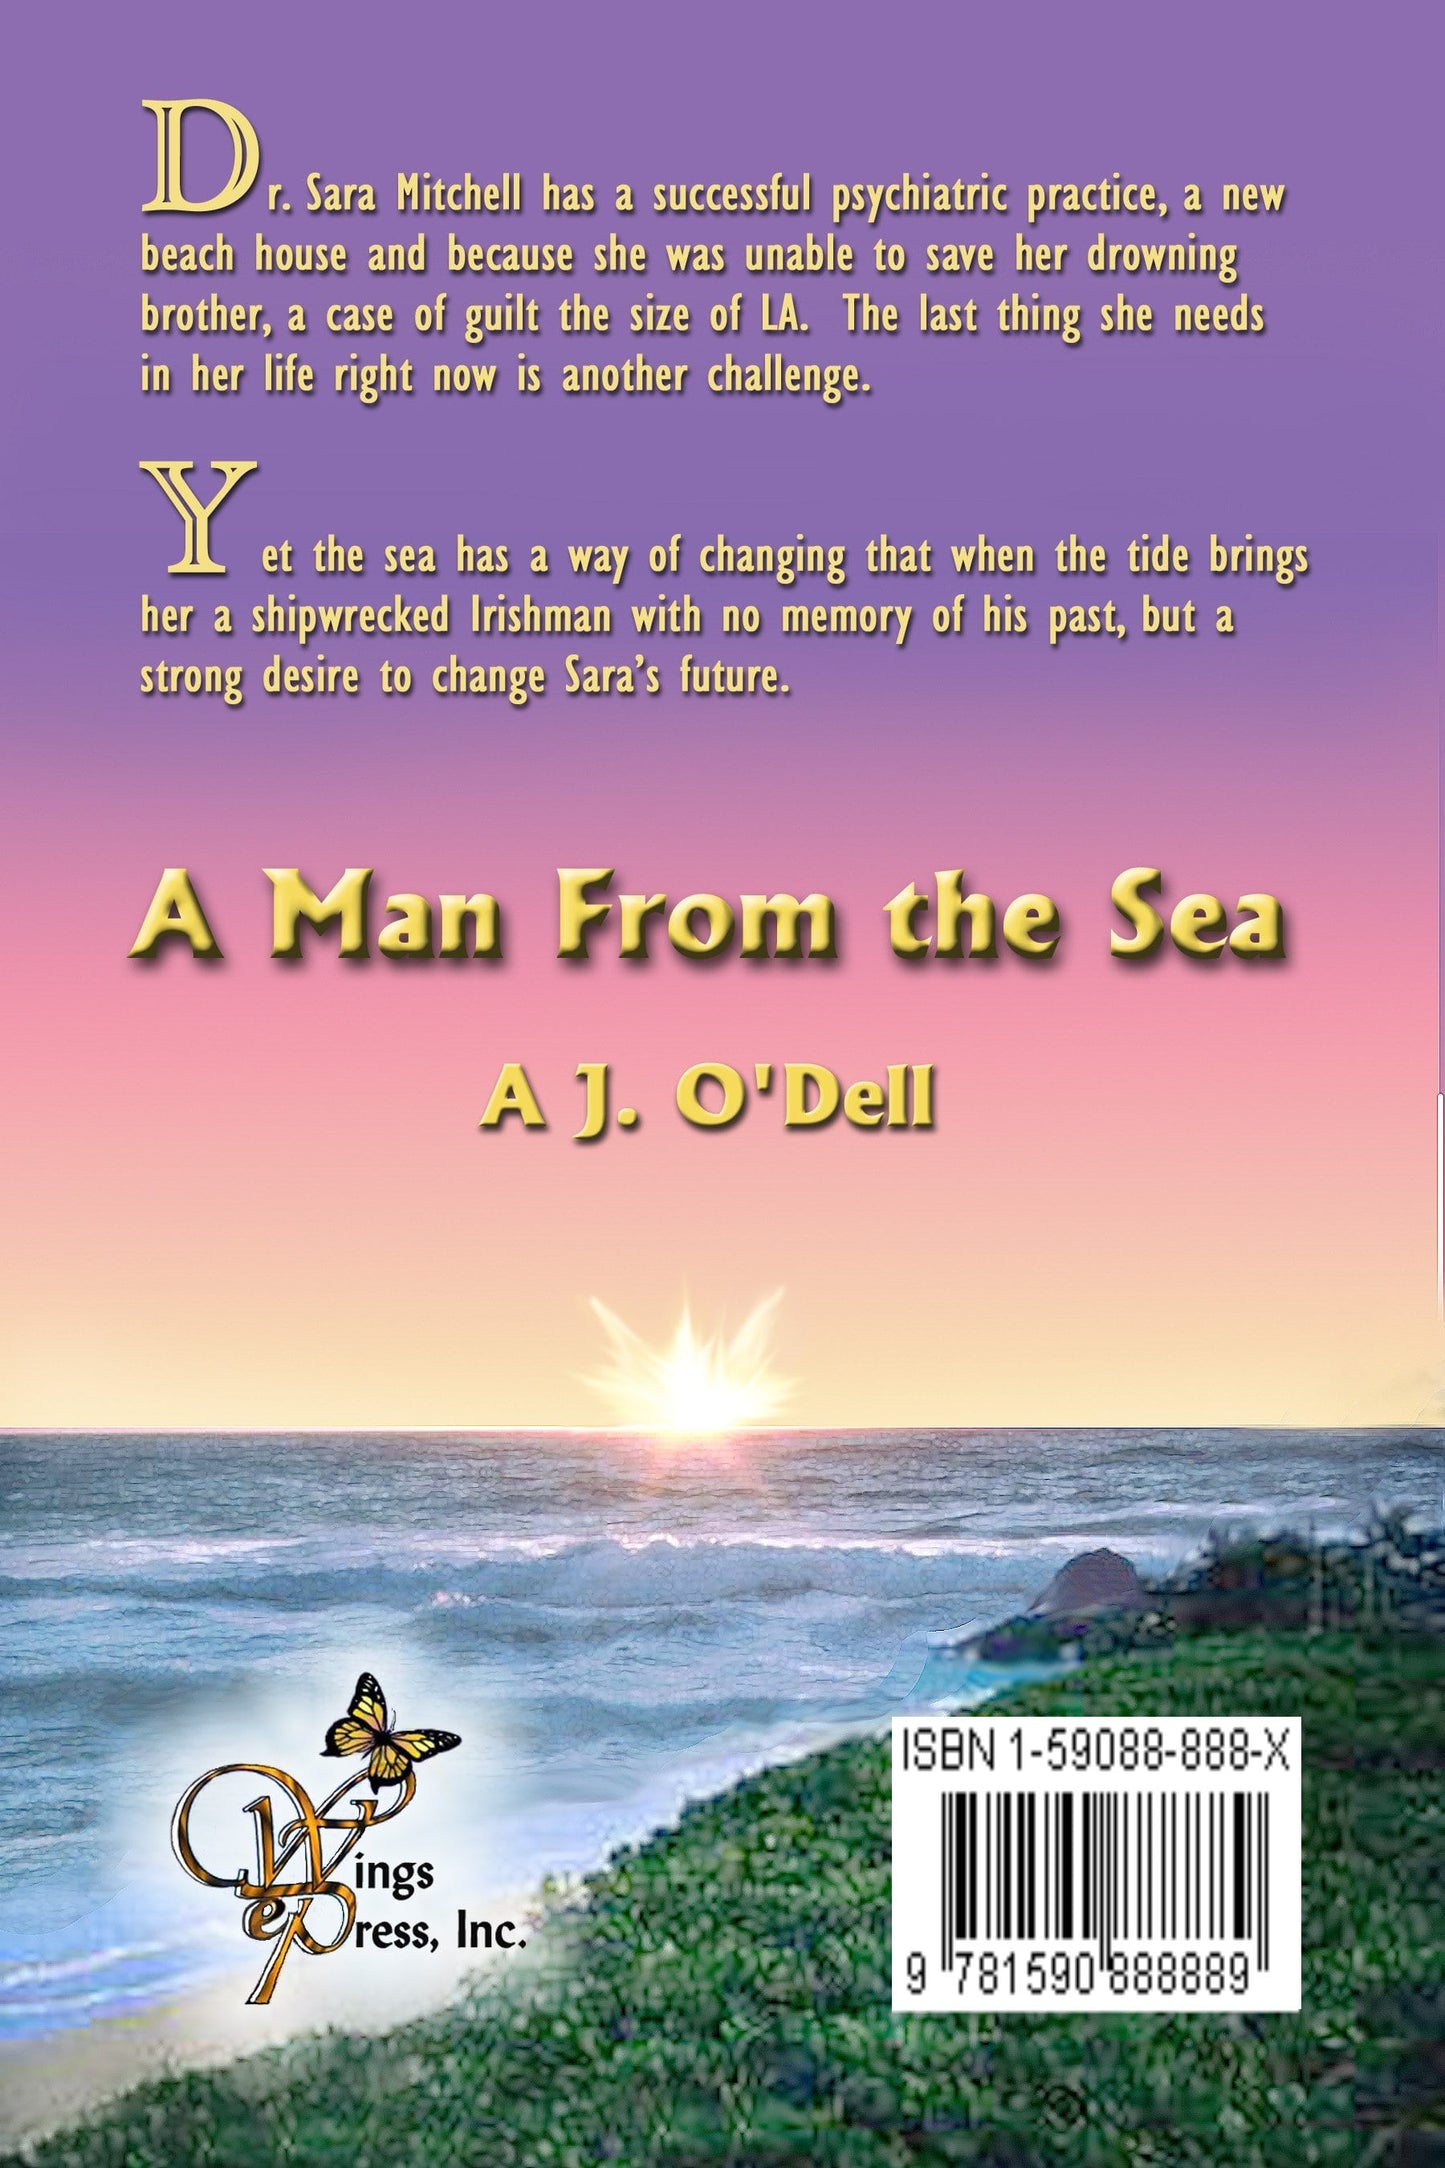 A Man From the Sea